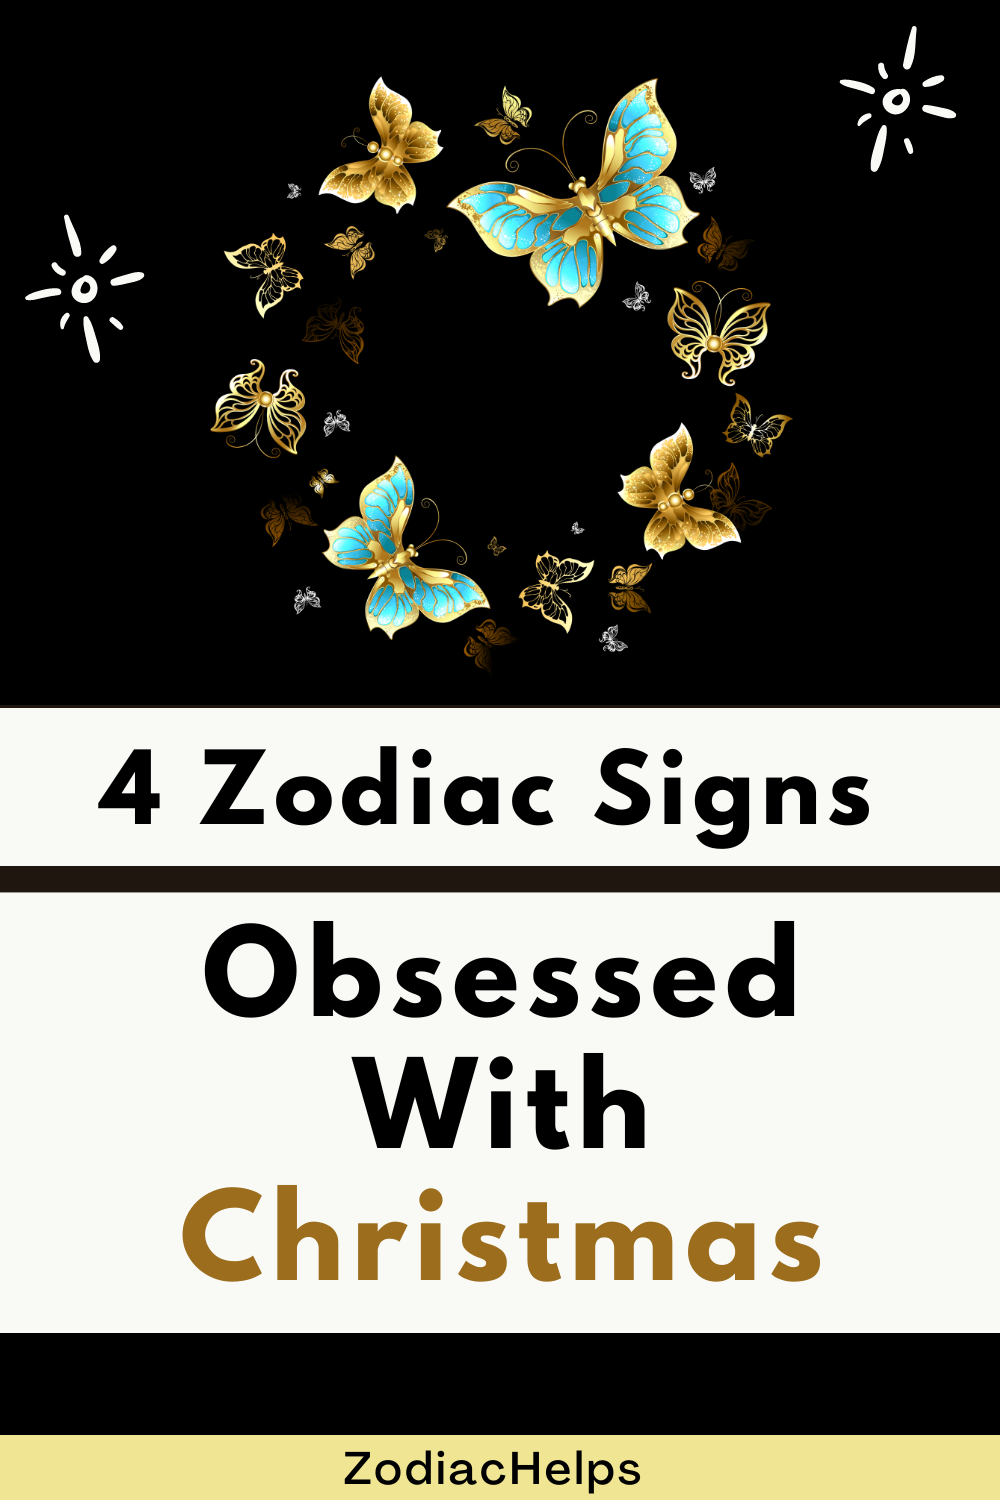 4 Zodiac Signs Obsessed With Christmas